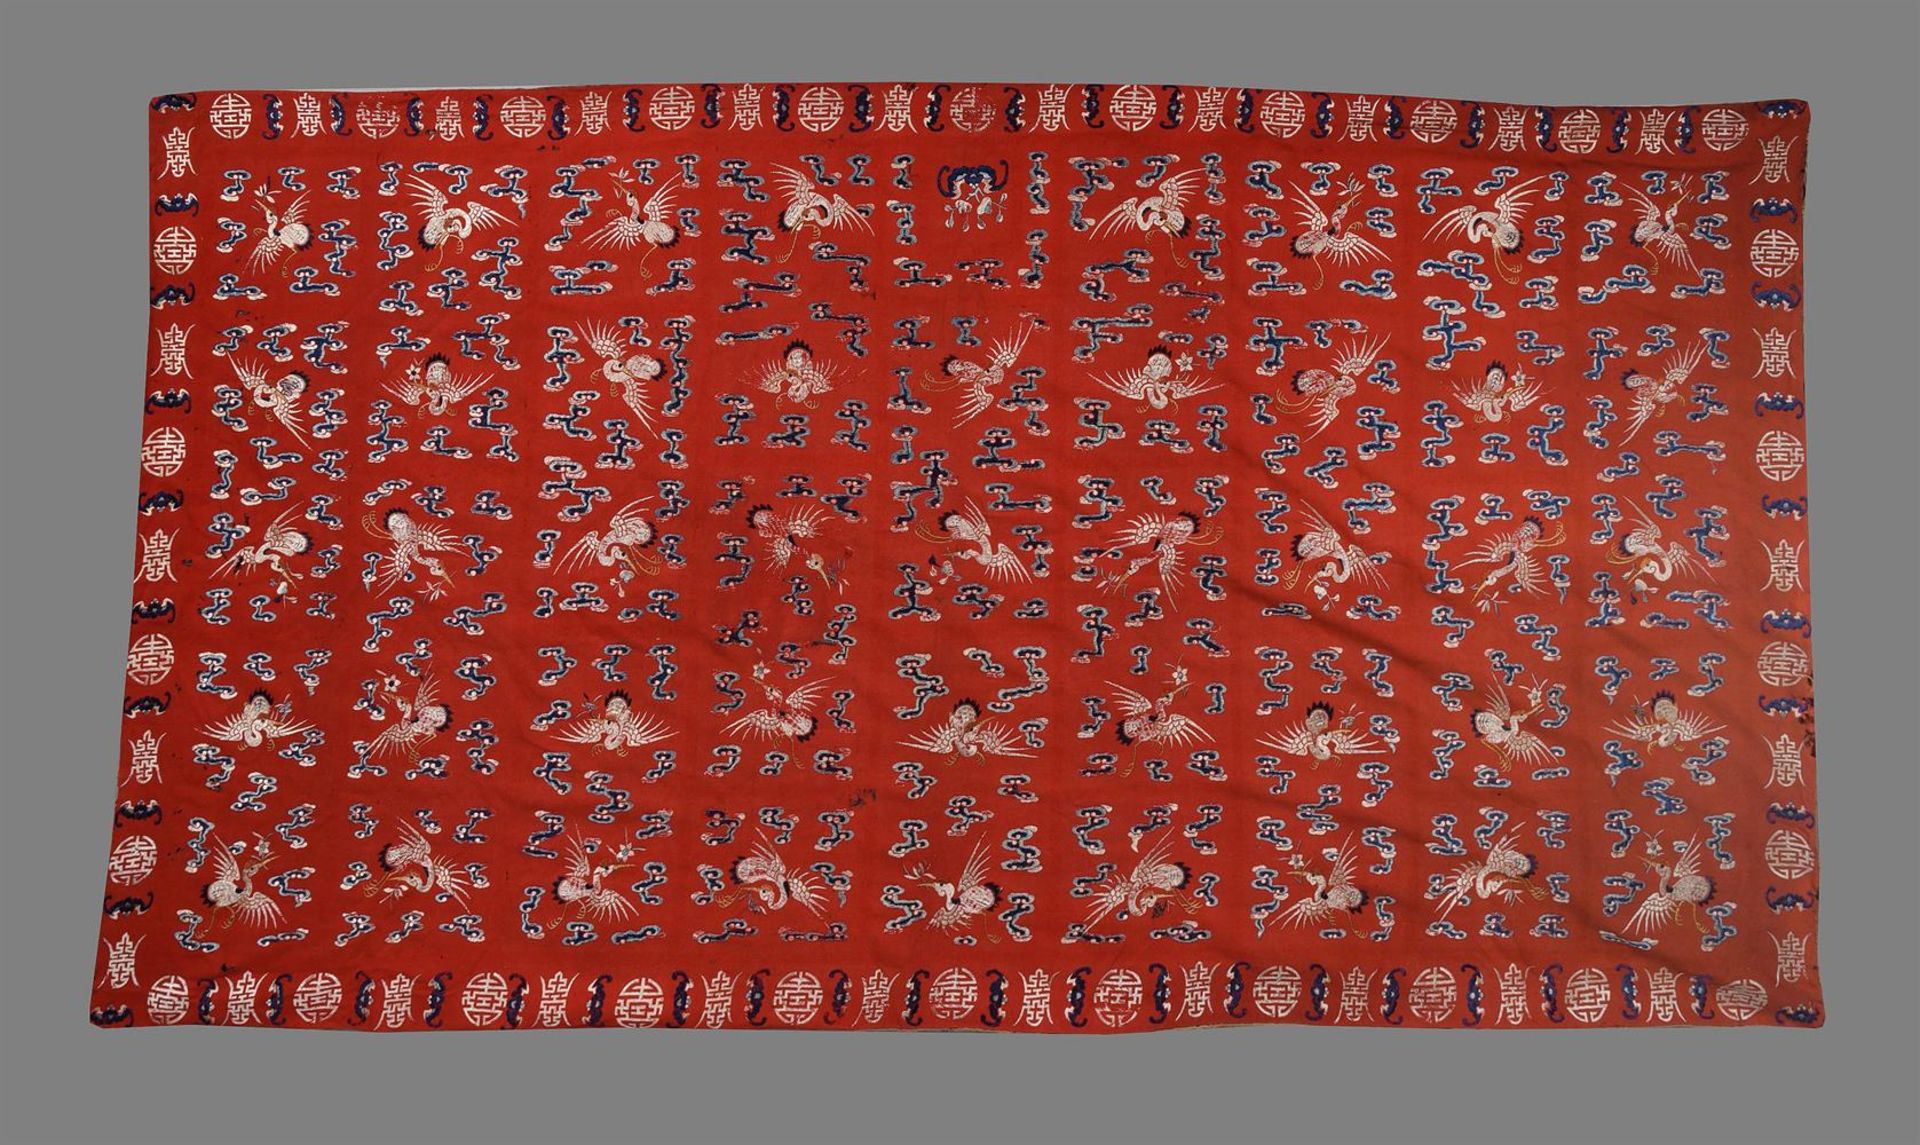 A large Chinese red velvet 'Longevity' wall hanging